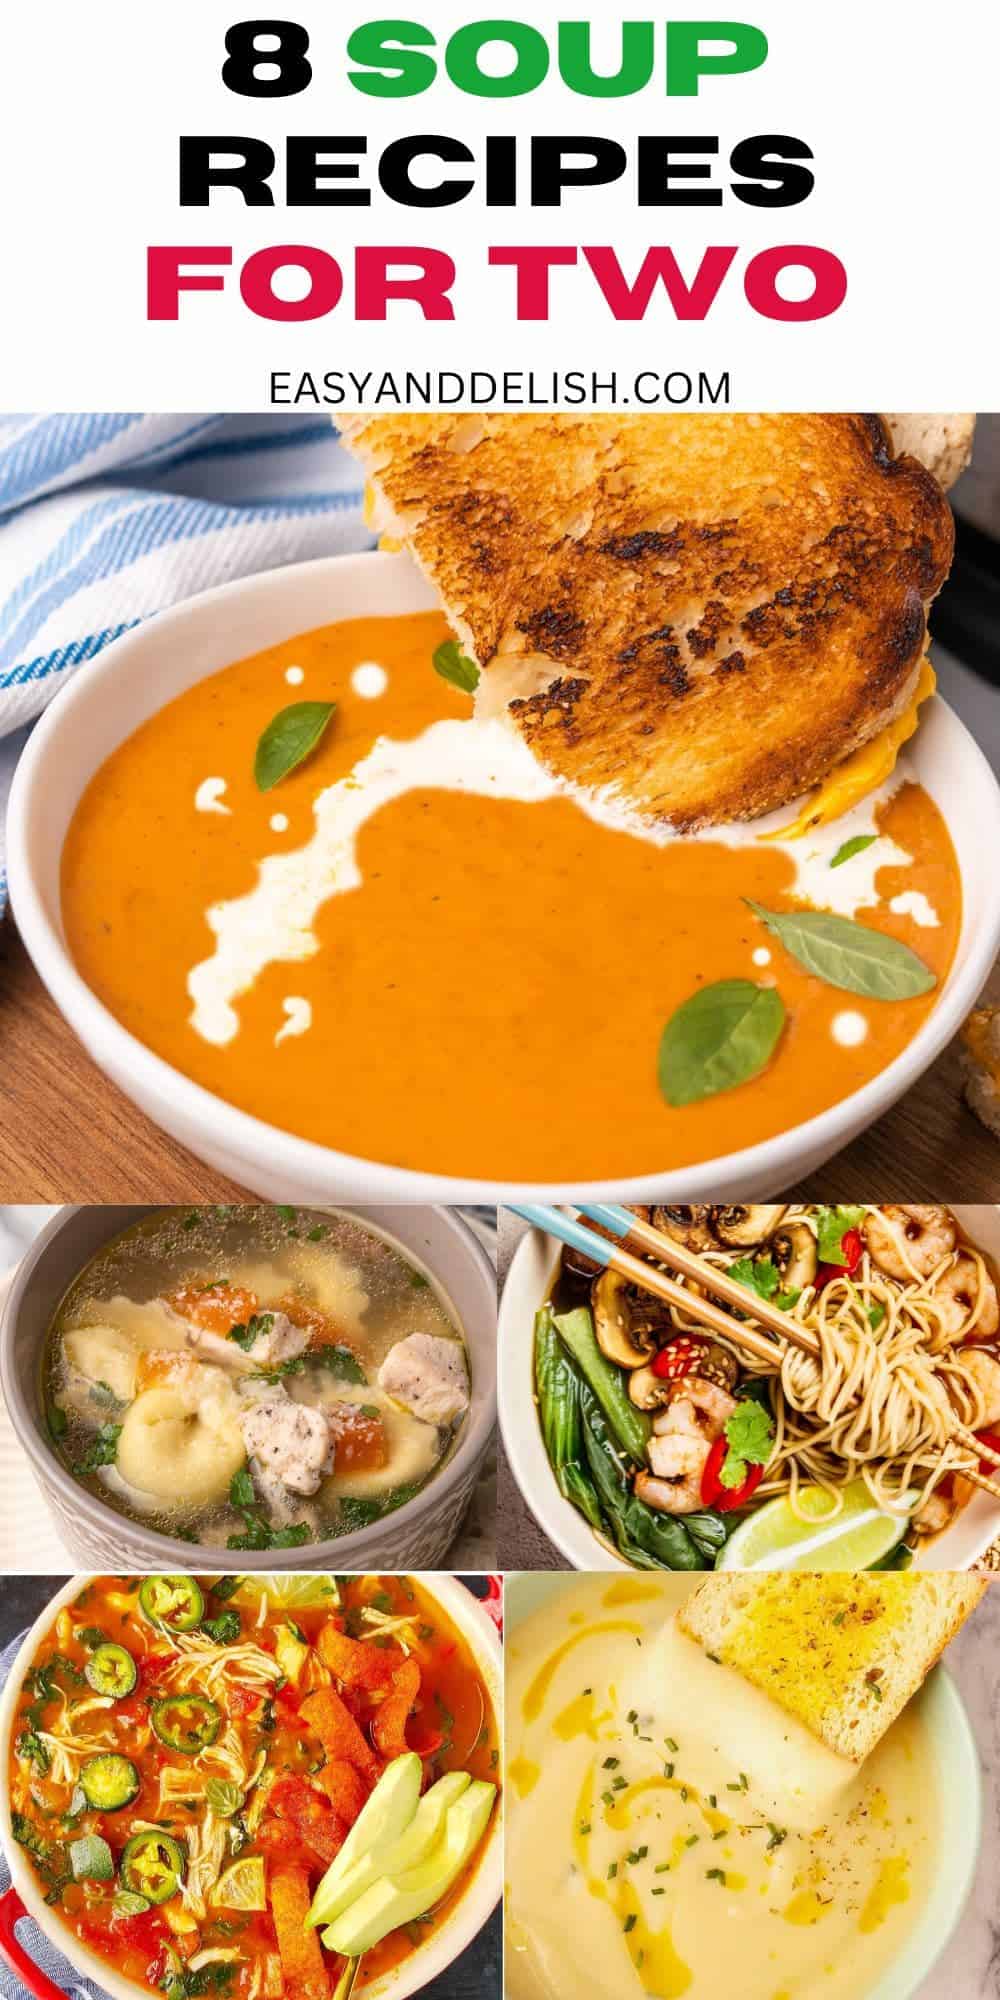 Photo collage showing 5 soups for 2.